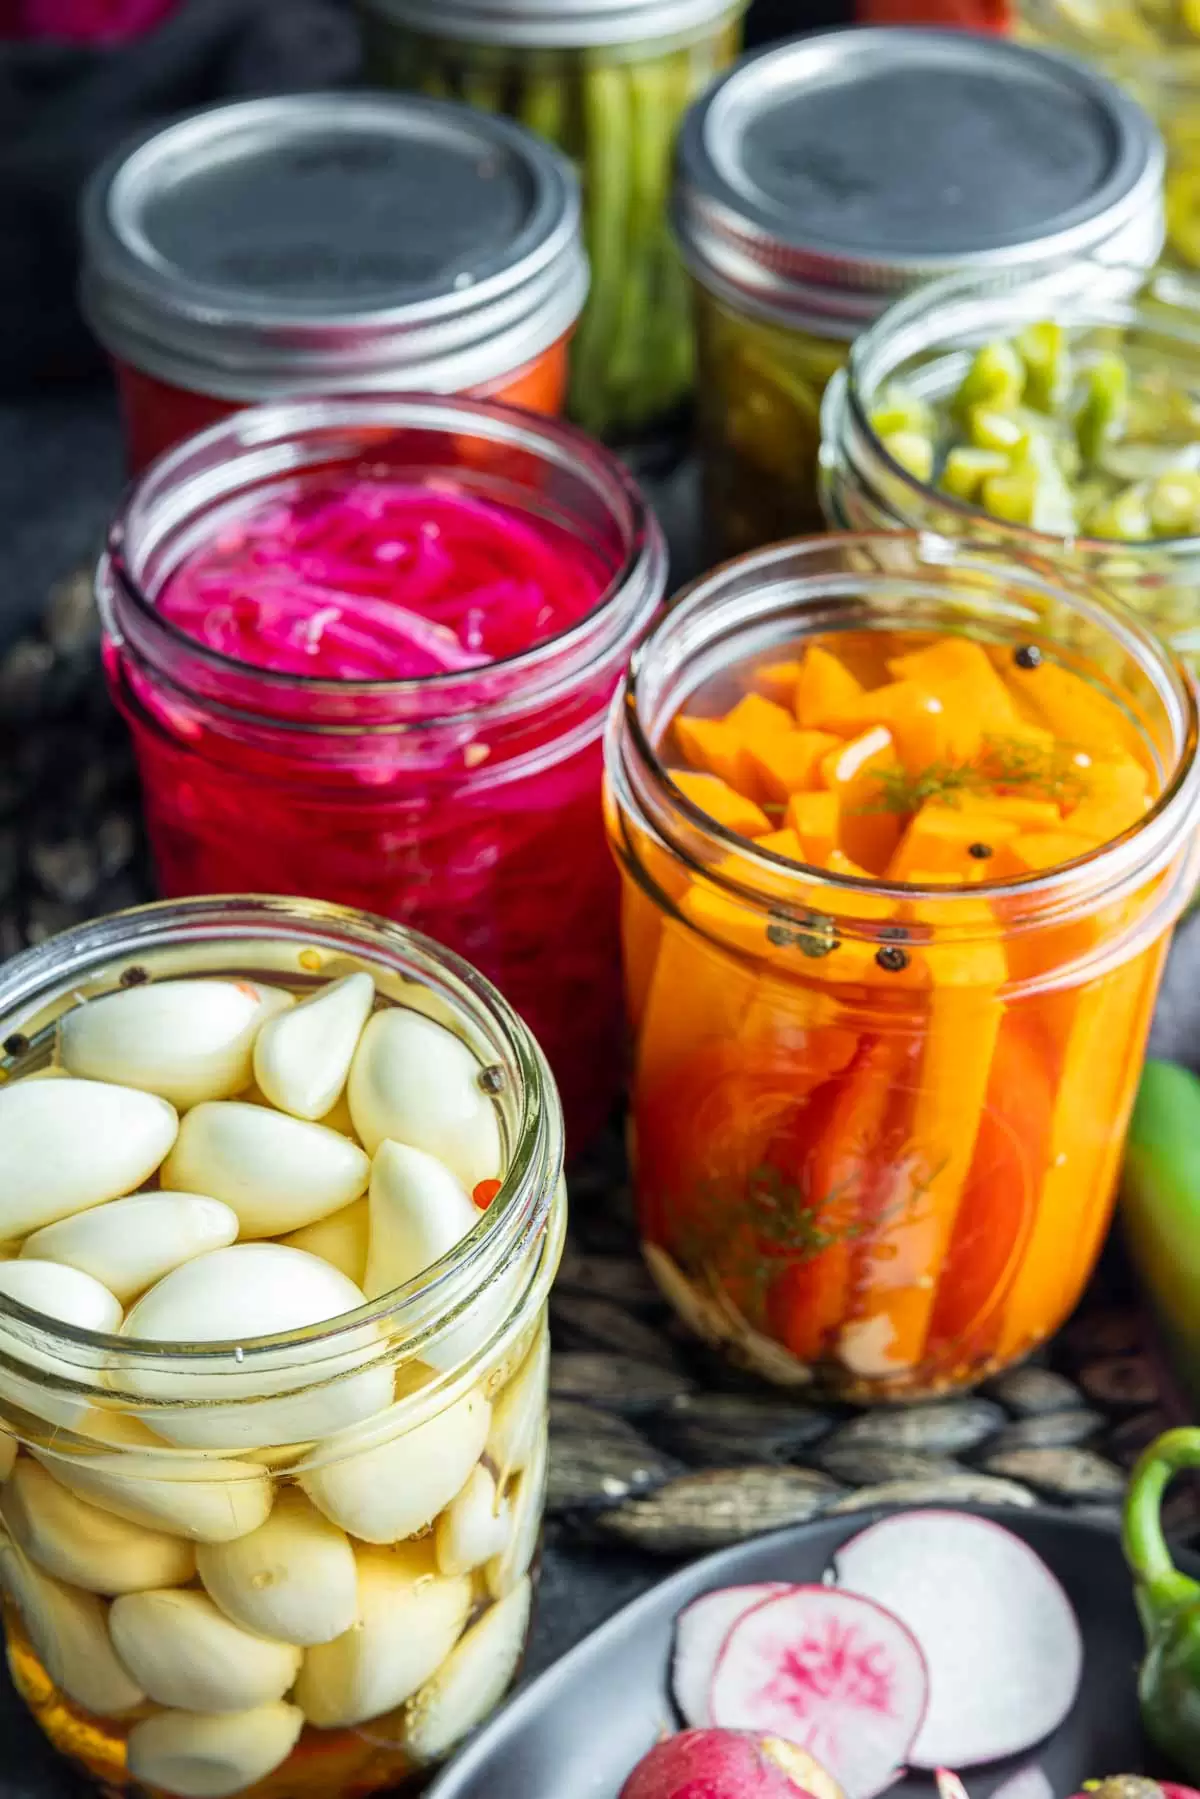 How to Quick Pickle Vegetables in jars at home